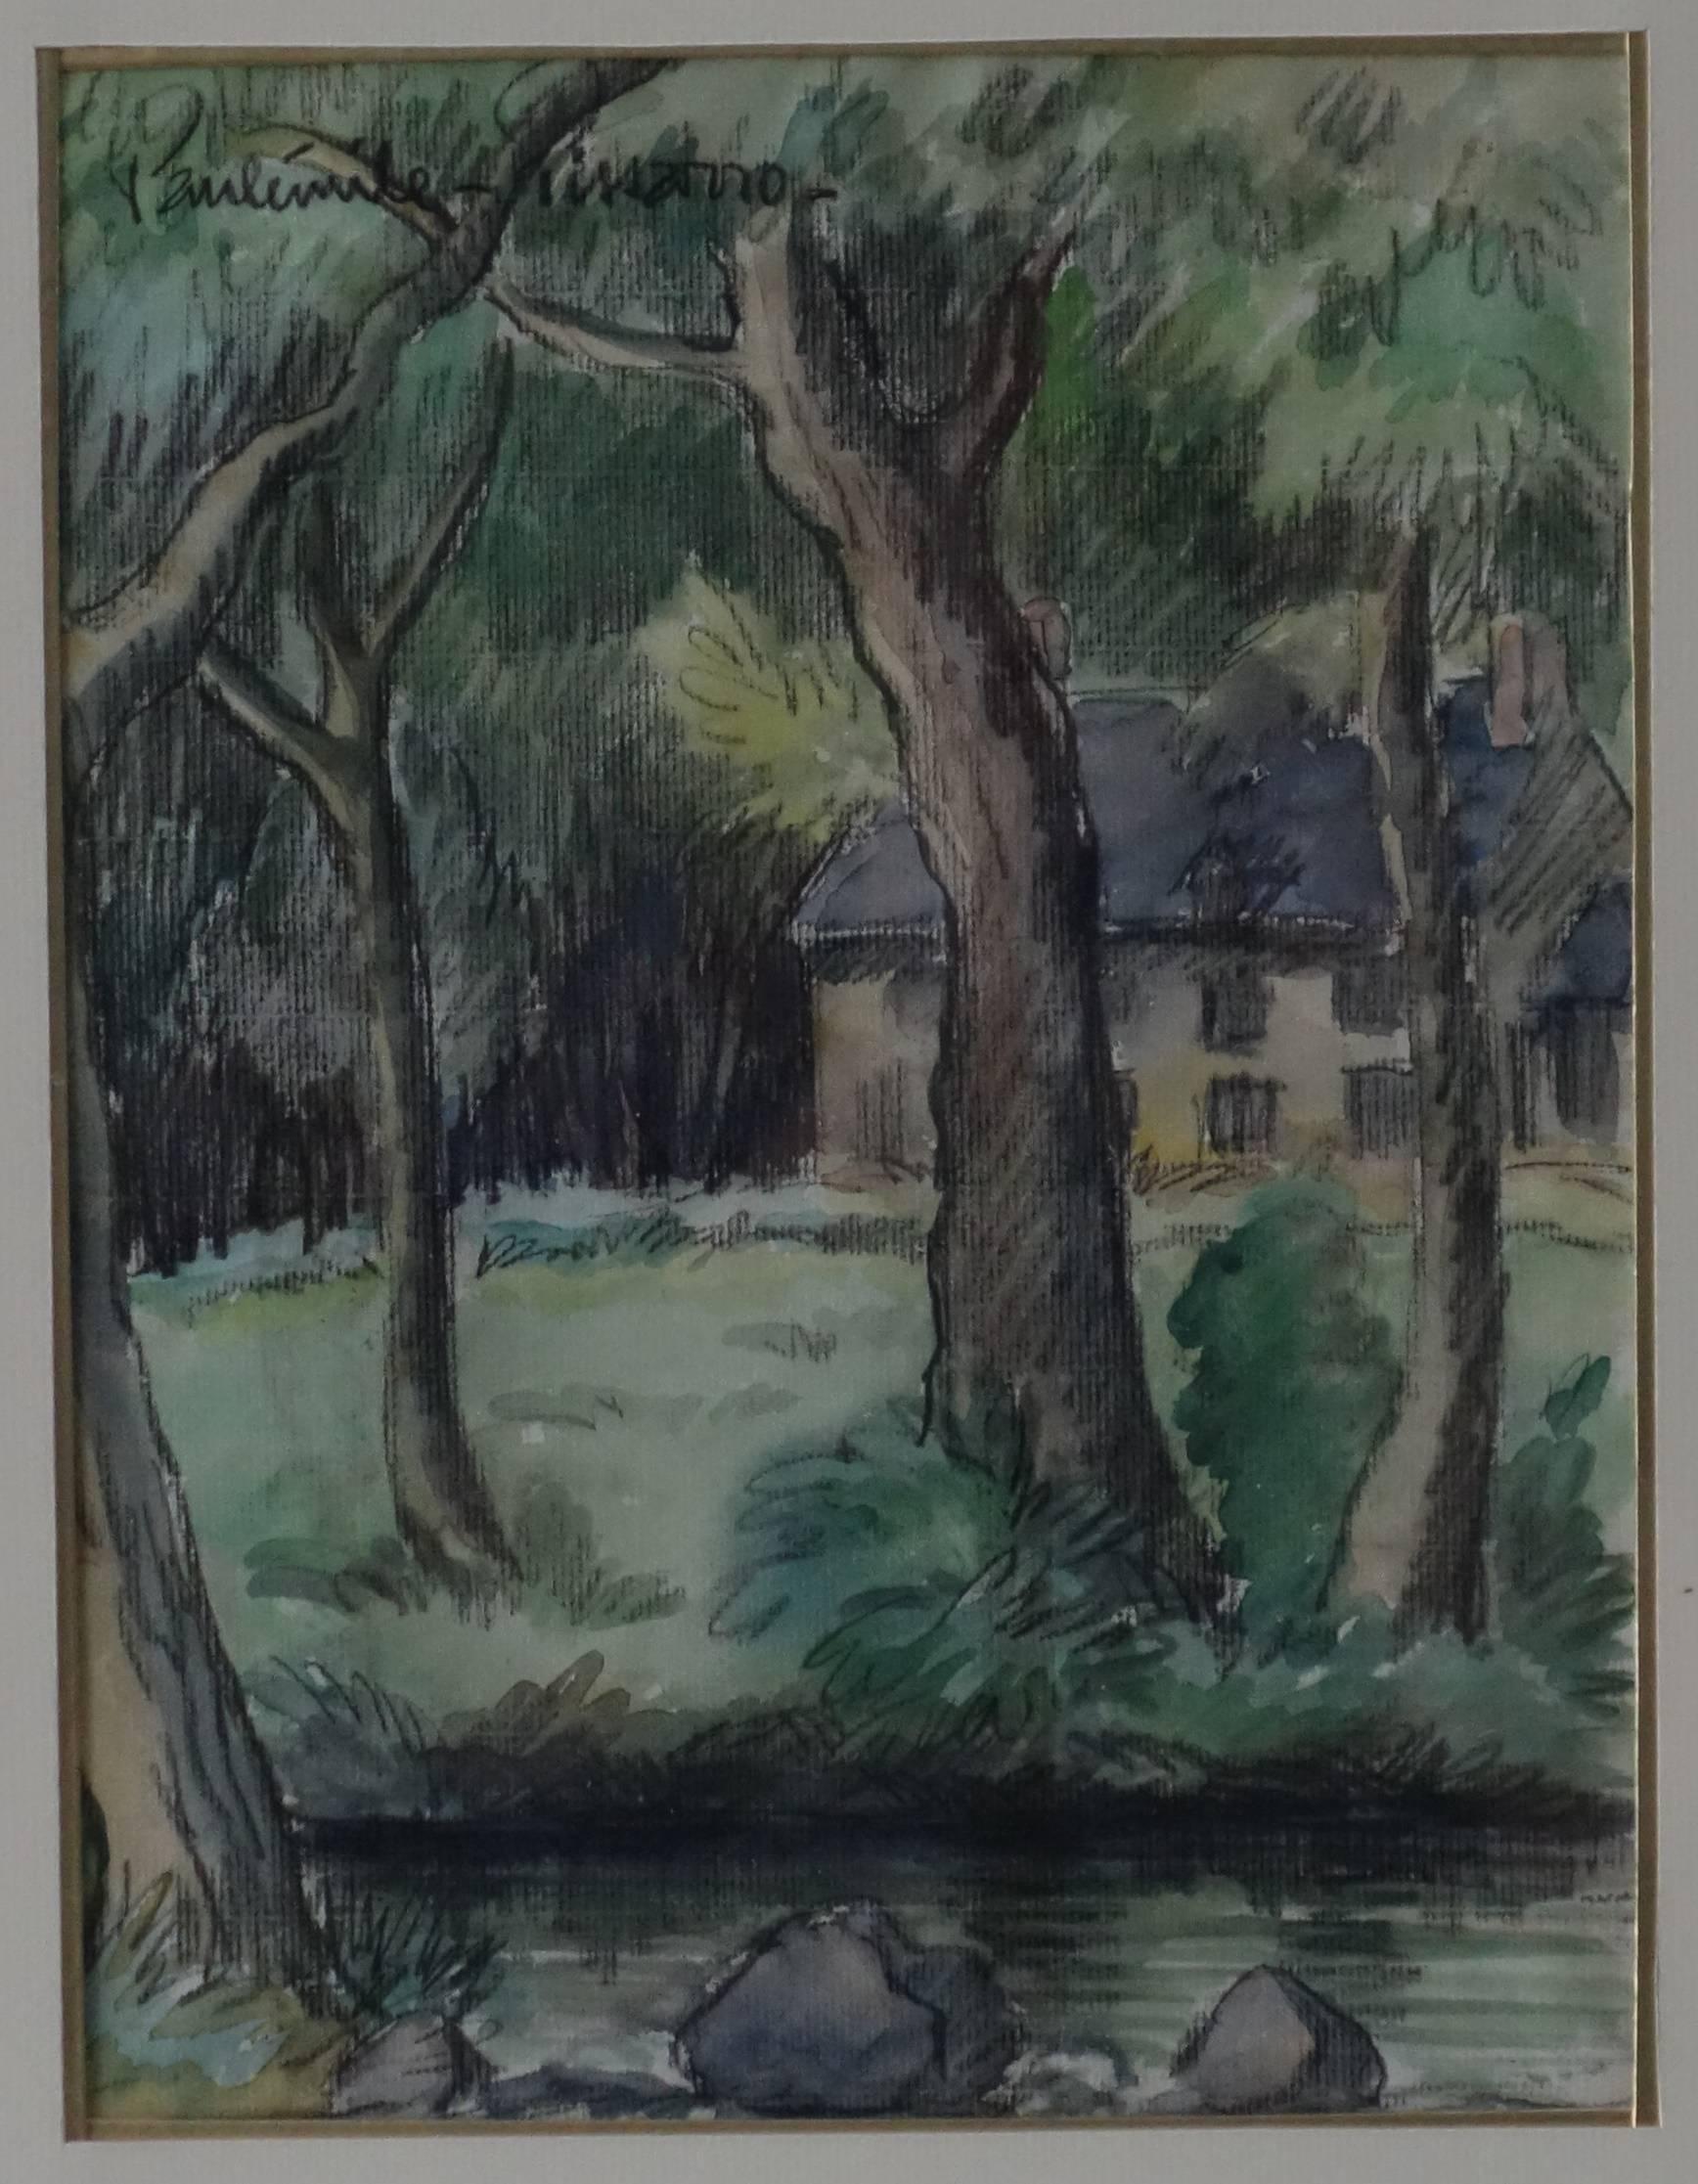 The House Near the River - Original watercolor painting - Signed - Impressionist Art by Paul Emile Pissarro